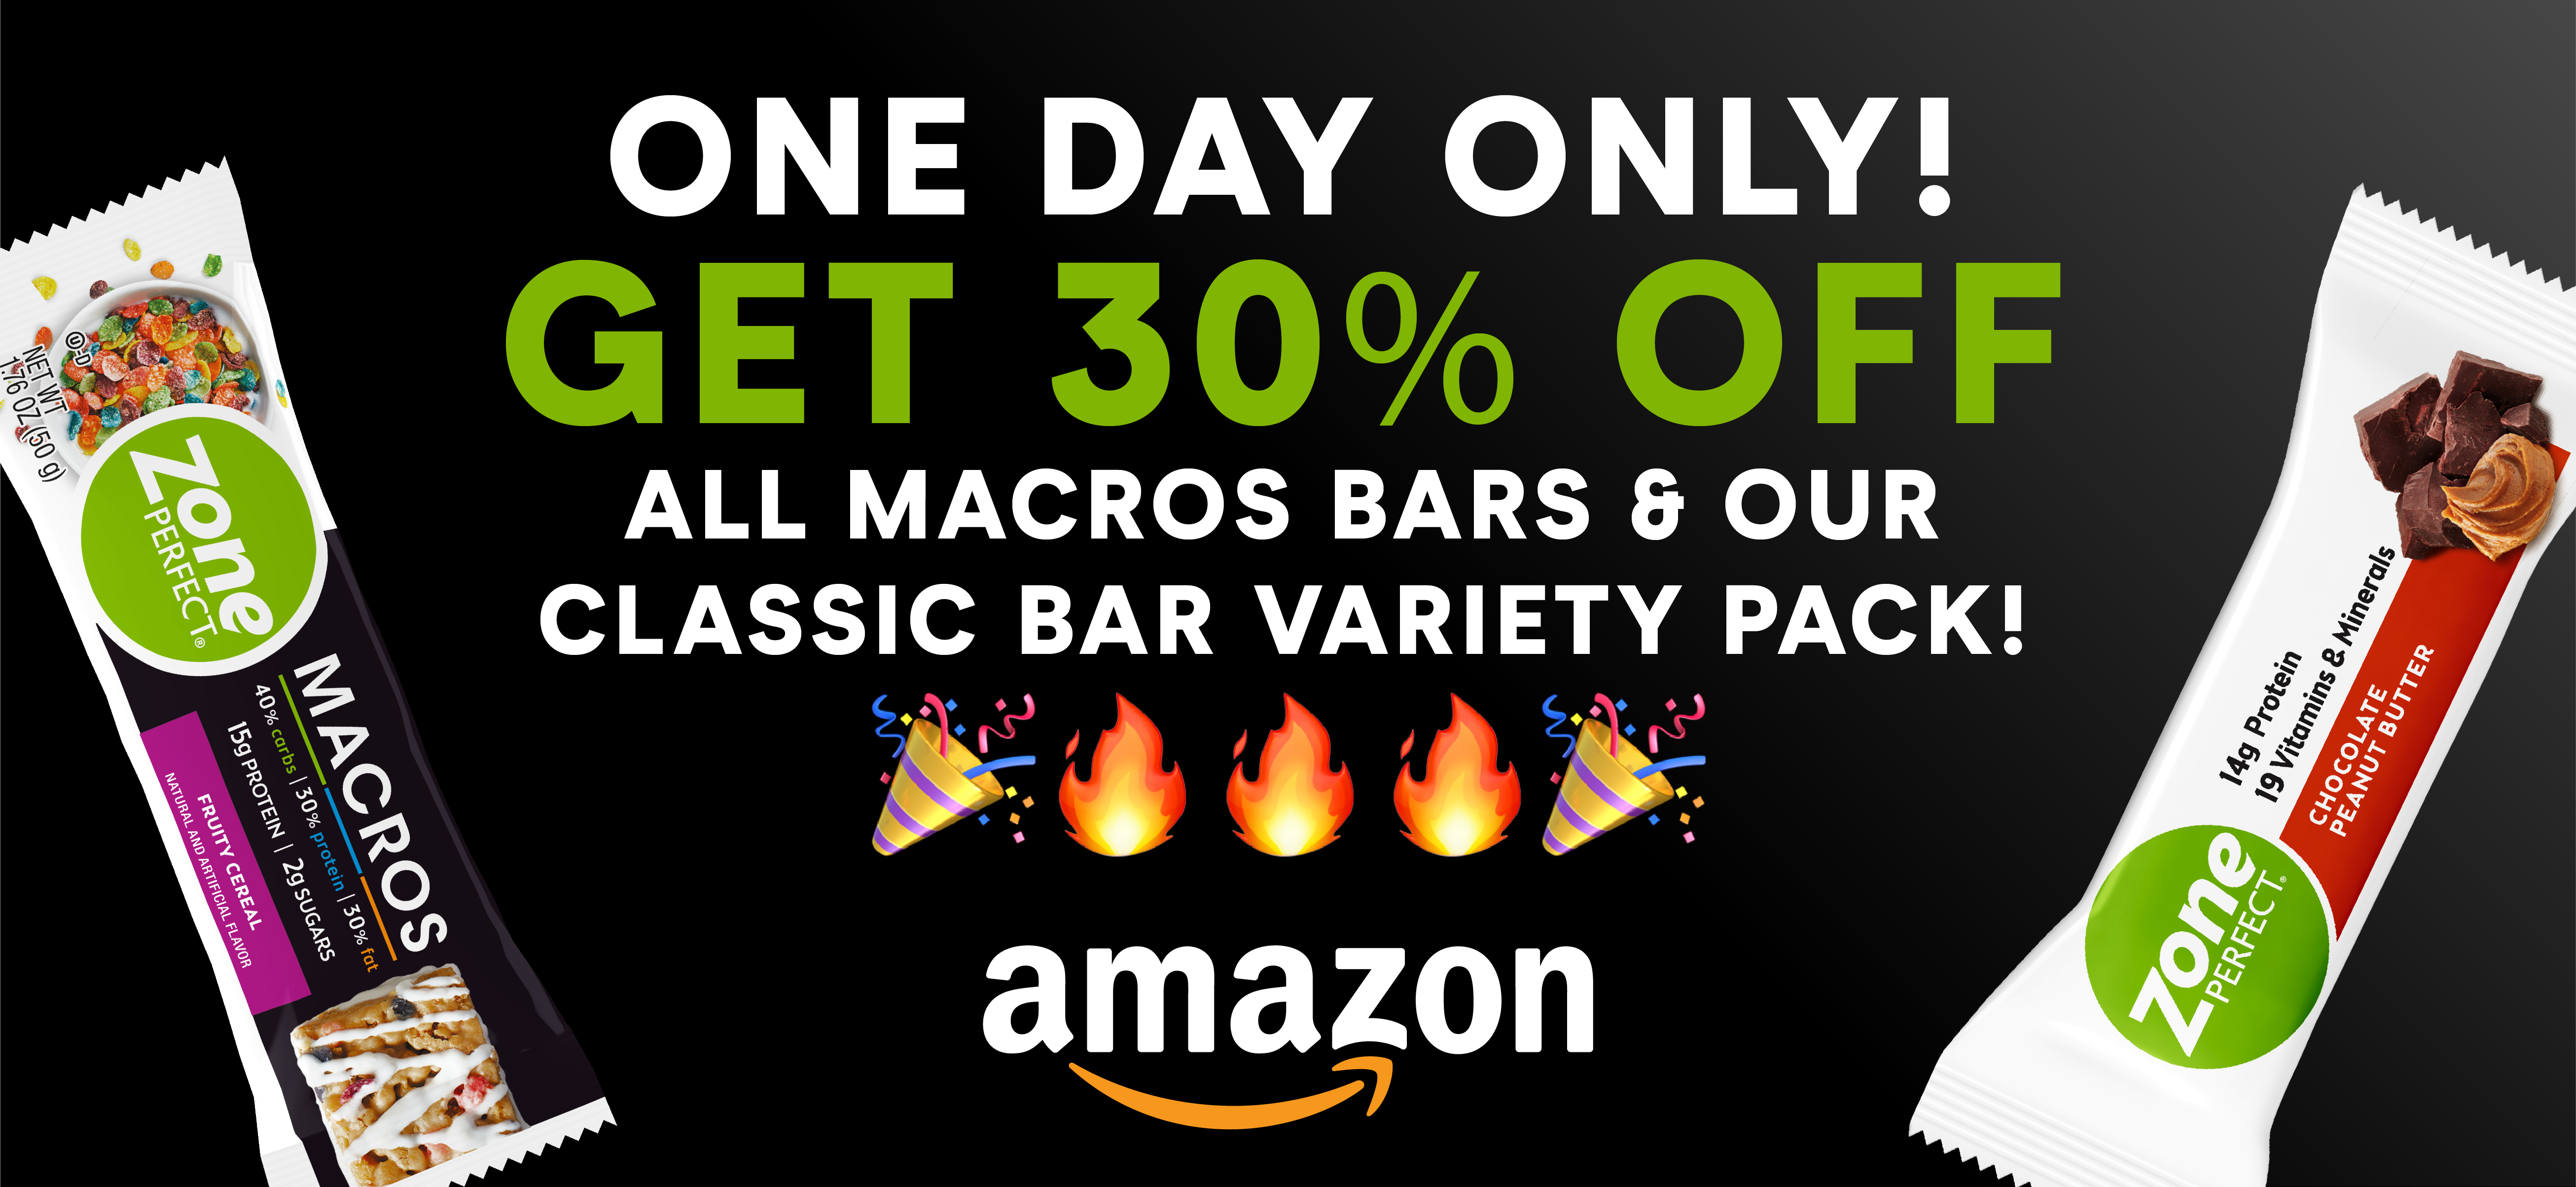 ONE DAY ONLY! Get 30% off all Macros Bars & our Classic Bar Variety Pack!  ONE DAY ONLY!